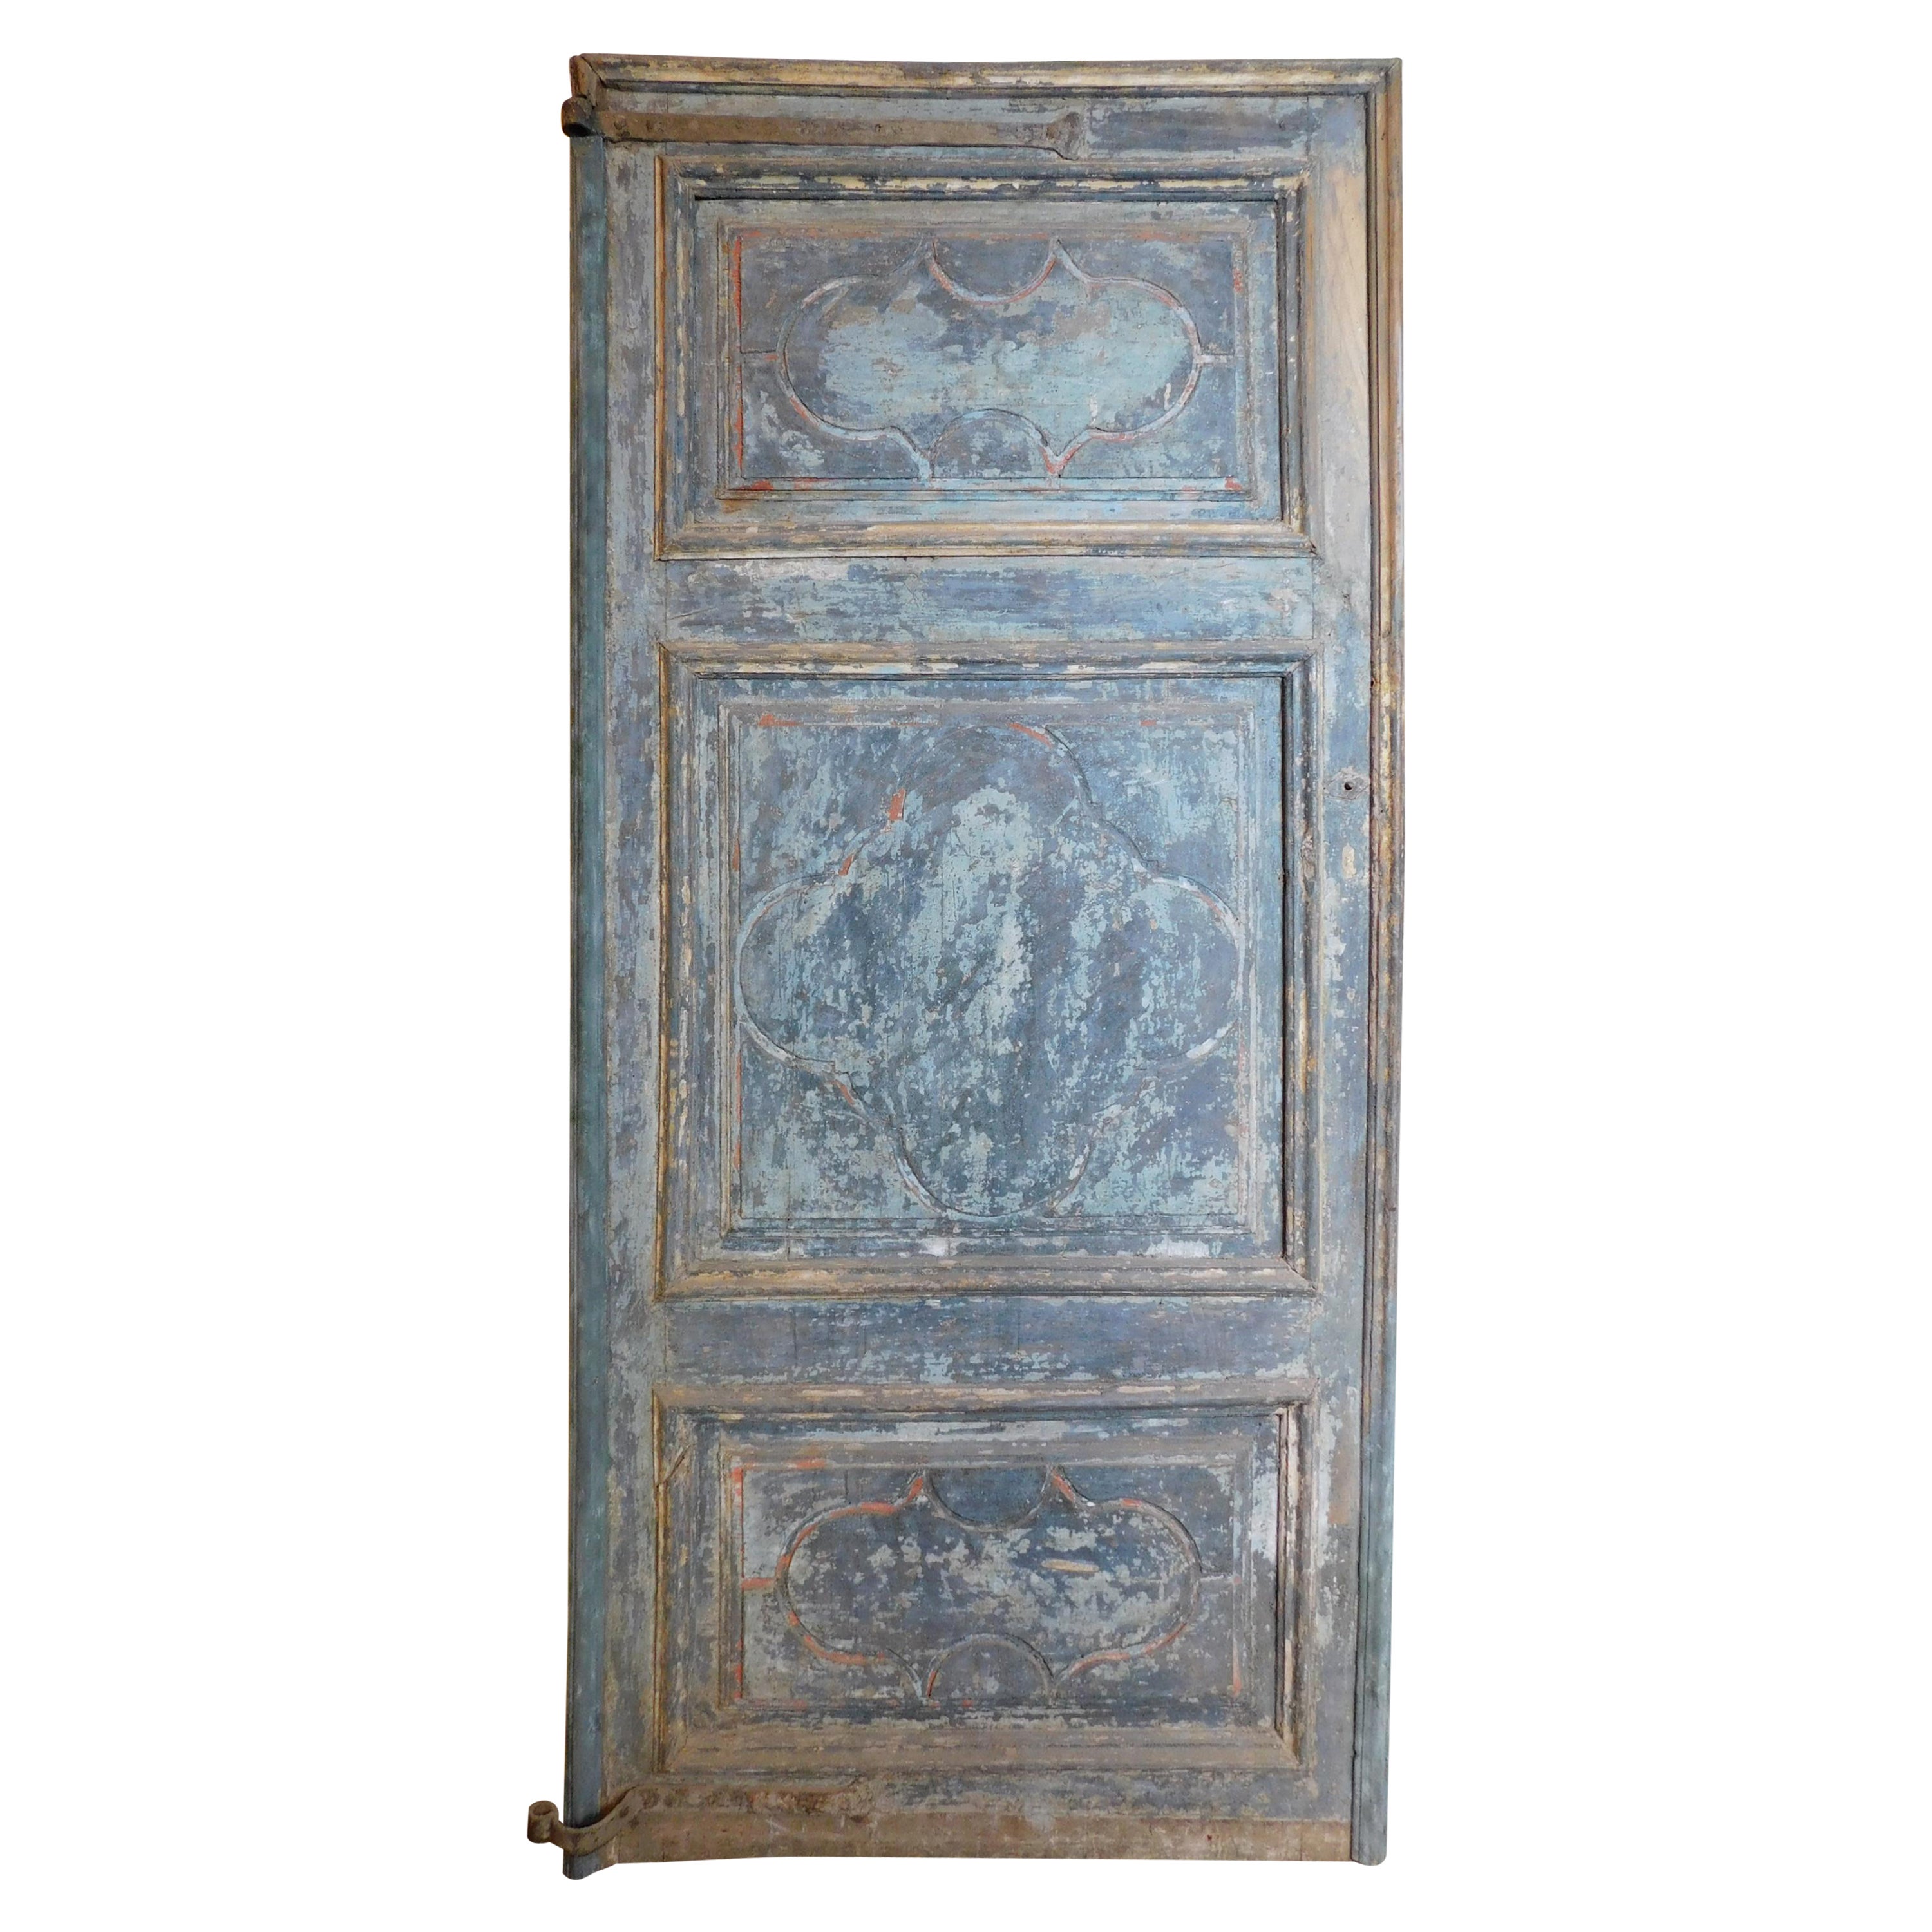 Antique Blue Lacquered Door with Three Carved Panels, 18th Century, Italy